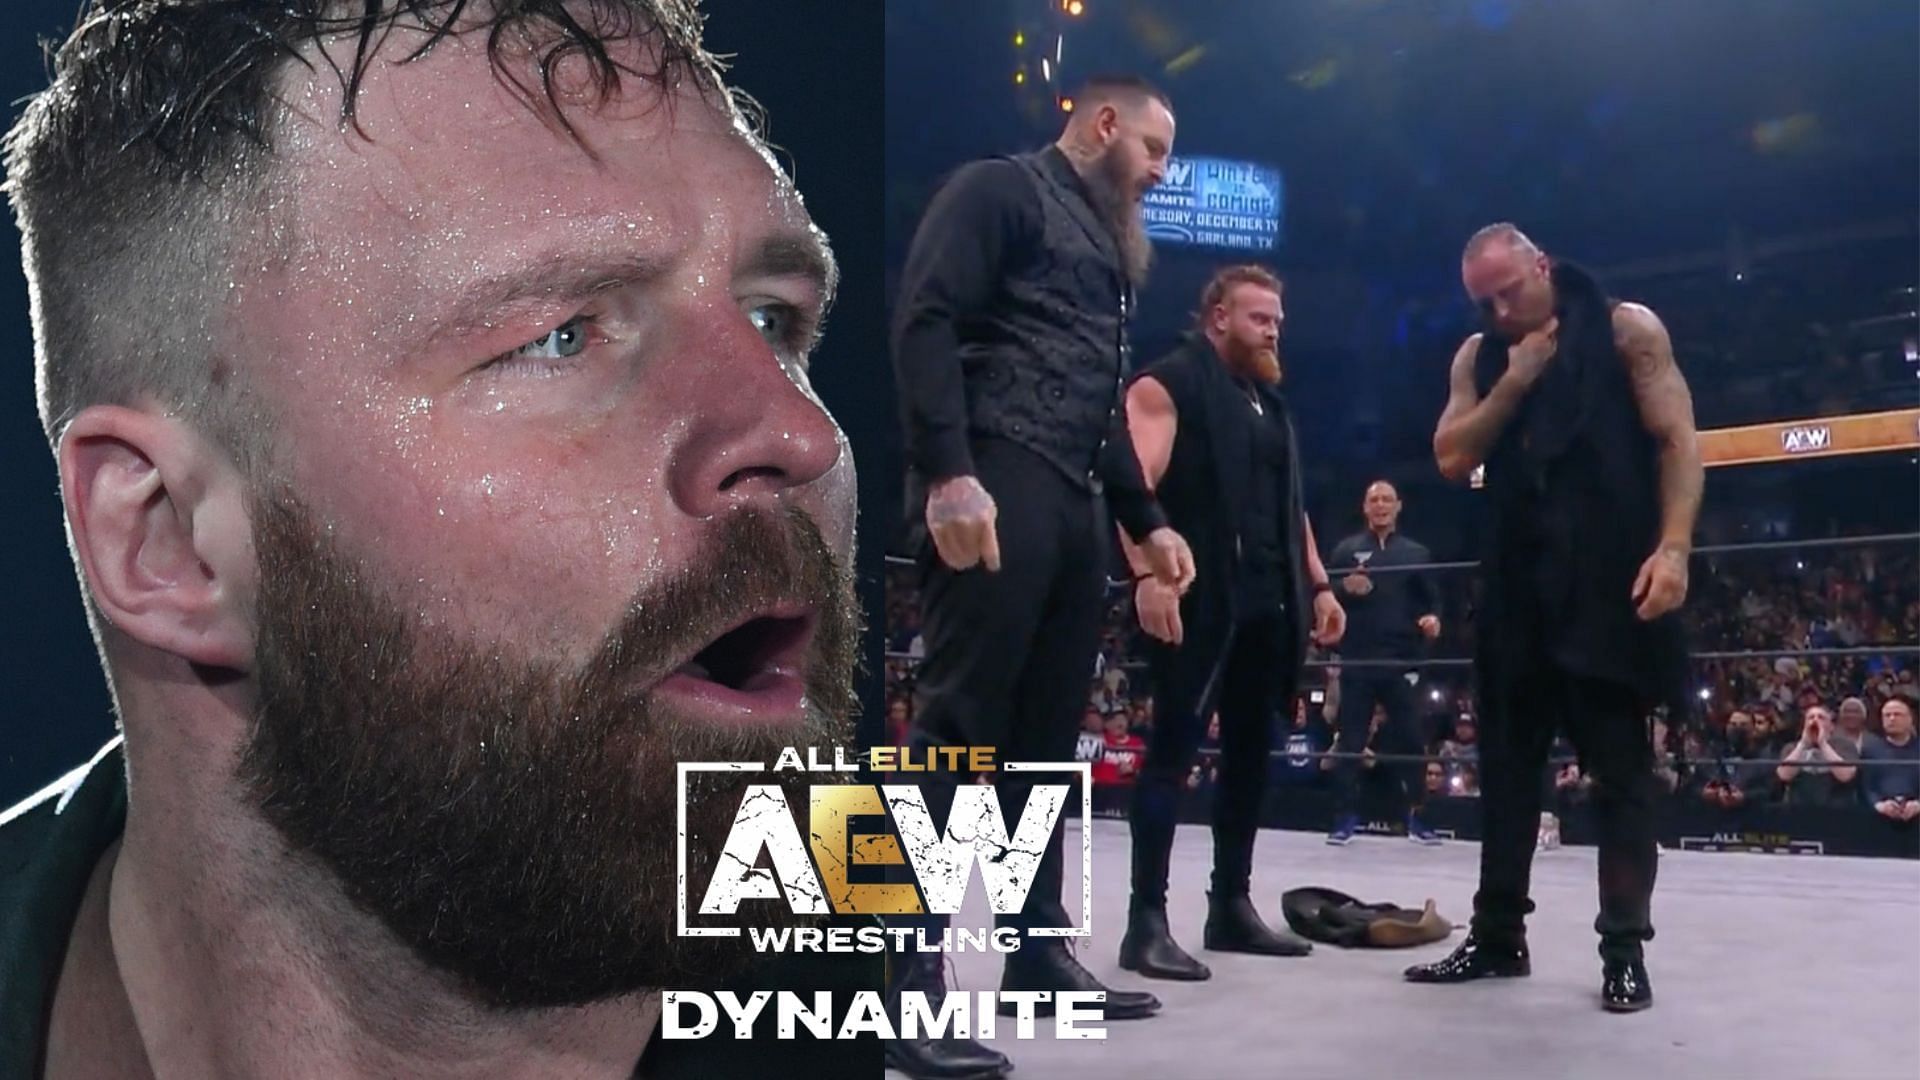 AEW Dynamite: AEW Dynamite Results: WWE legend breaks silence after betraying Jon Moxley, new no.1 contender crowned, House of Black destroys multiple stars on return, top champion relinquishes title